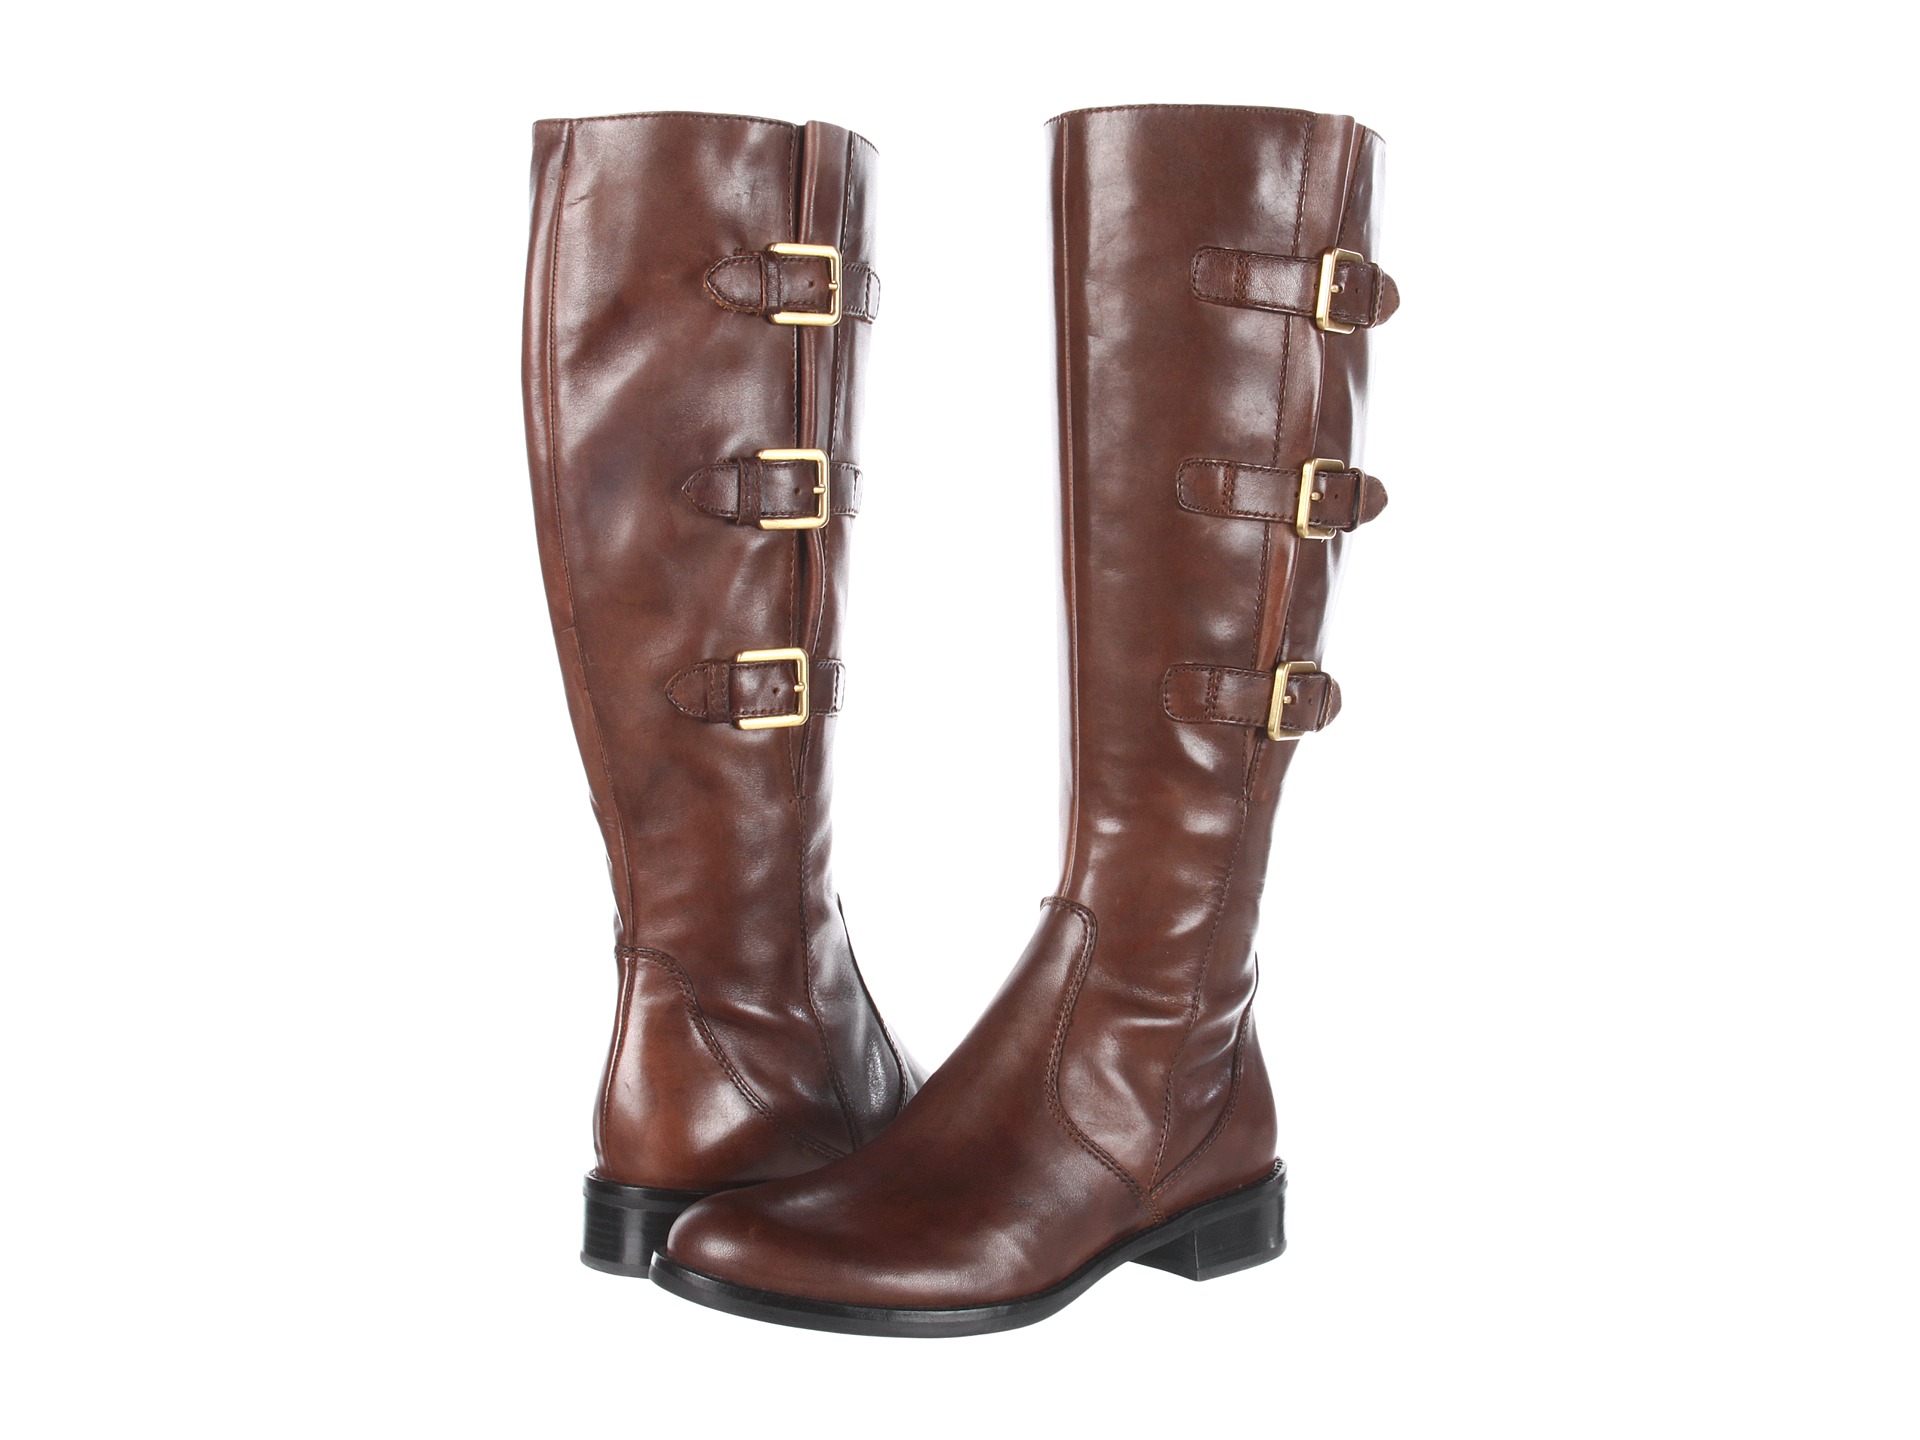 Ecco Hobart Buckle 25 Mm Boot Mink | Shipped Free at Zappos